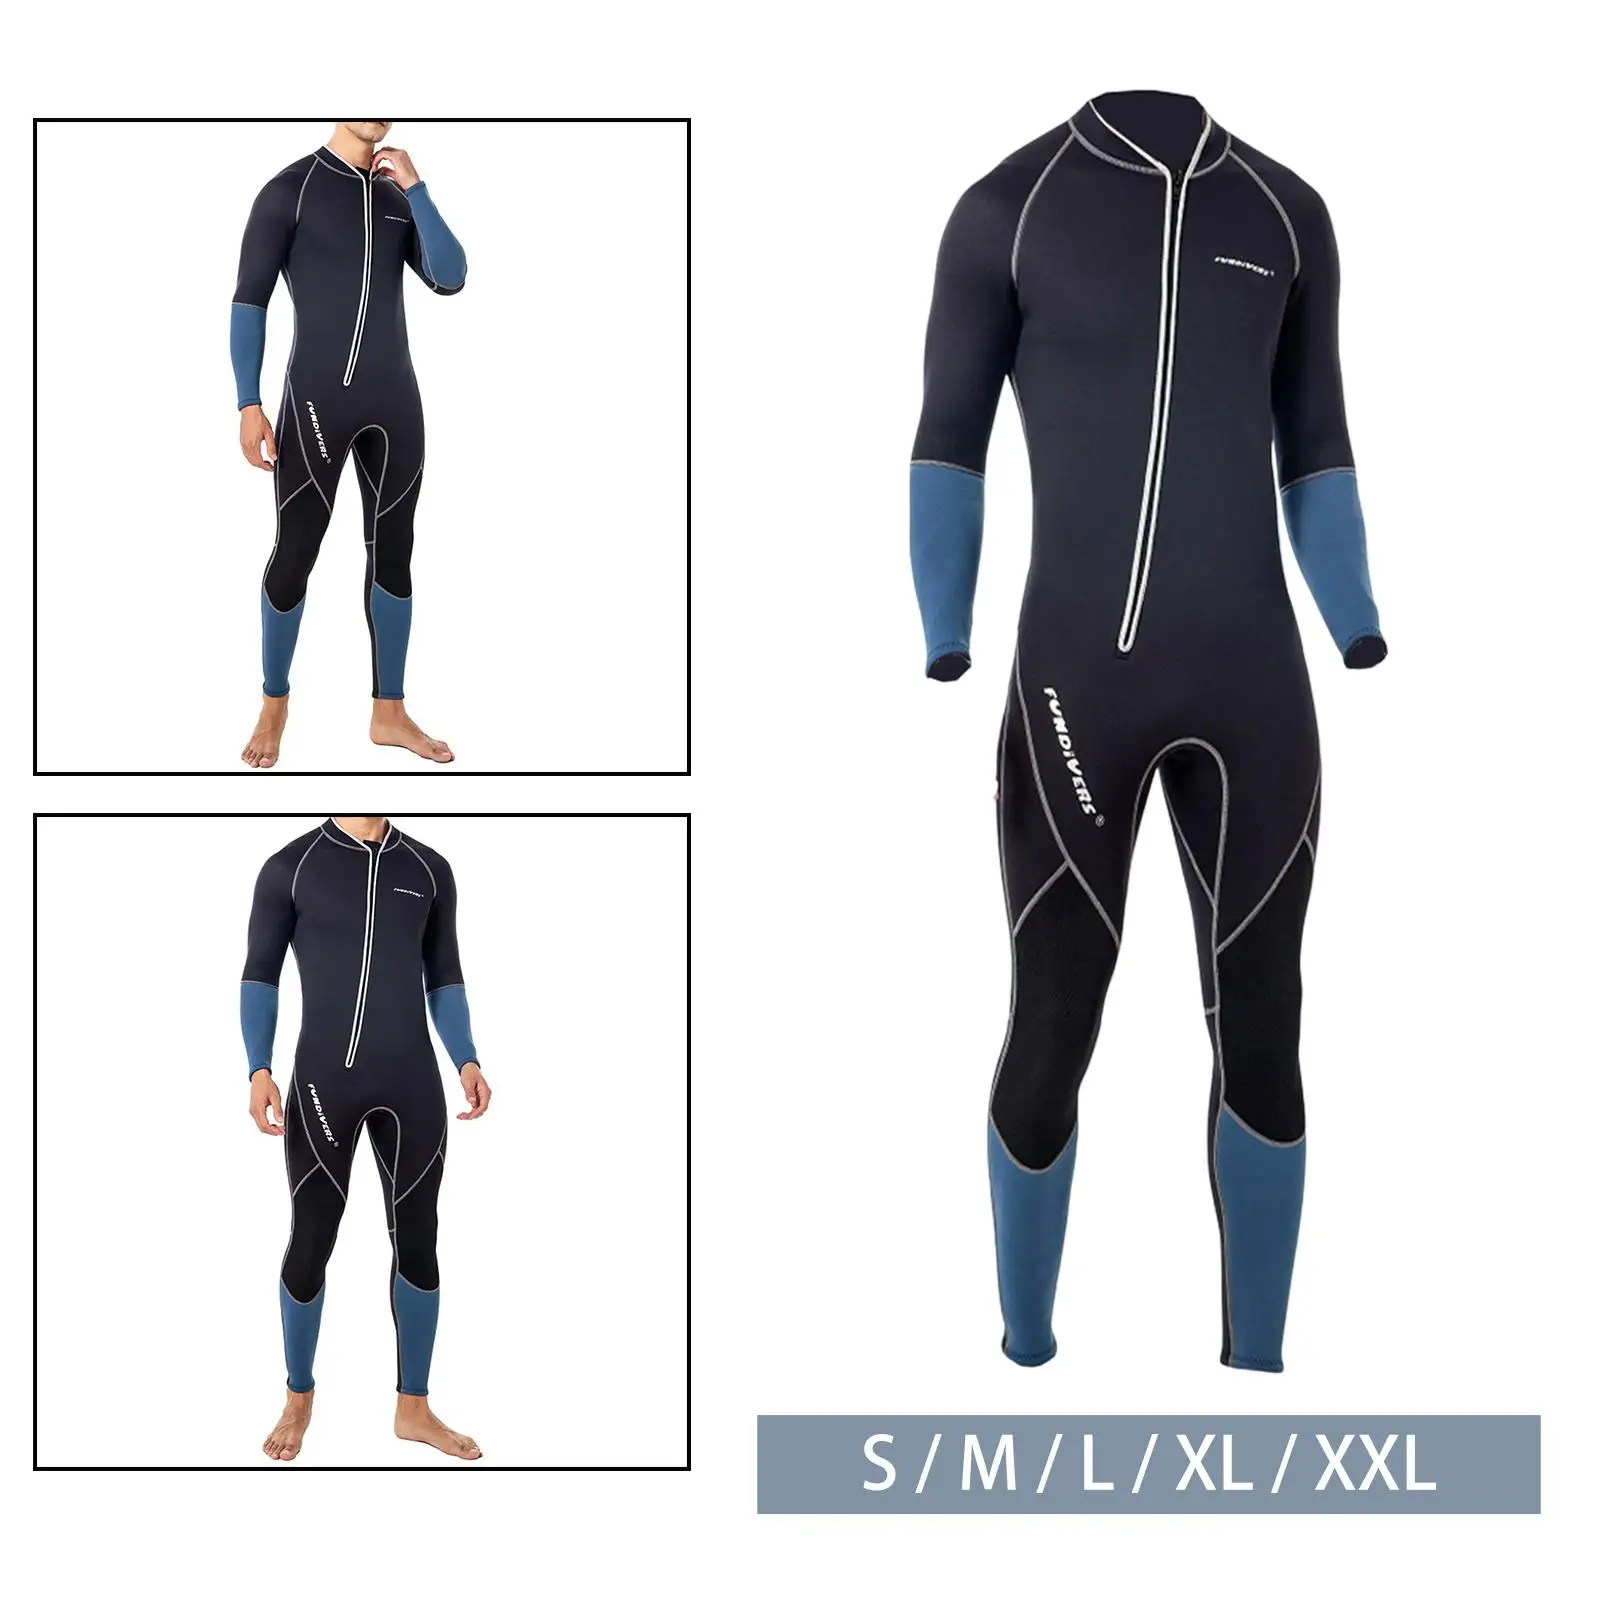 3mm Neoprene Wetsuit Stretch Scuba Diving Suit for Water Sports